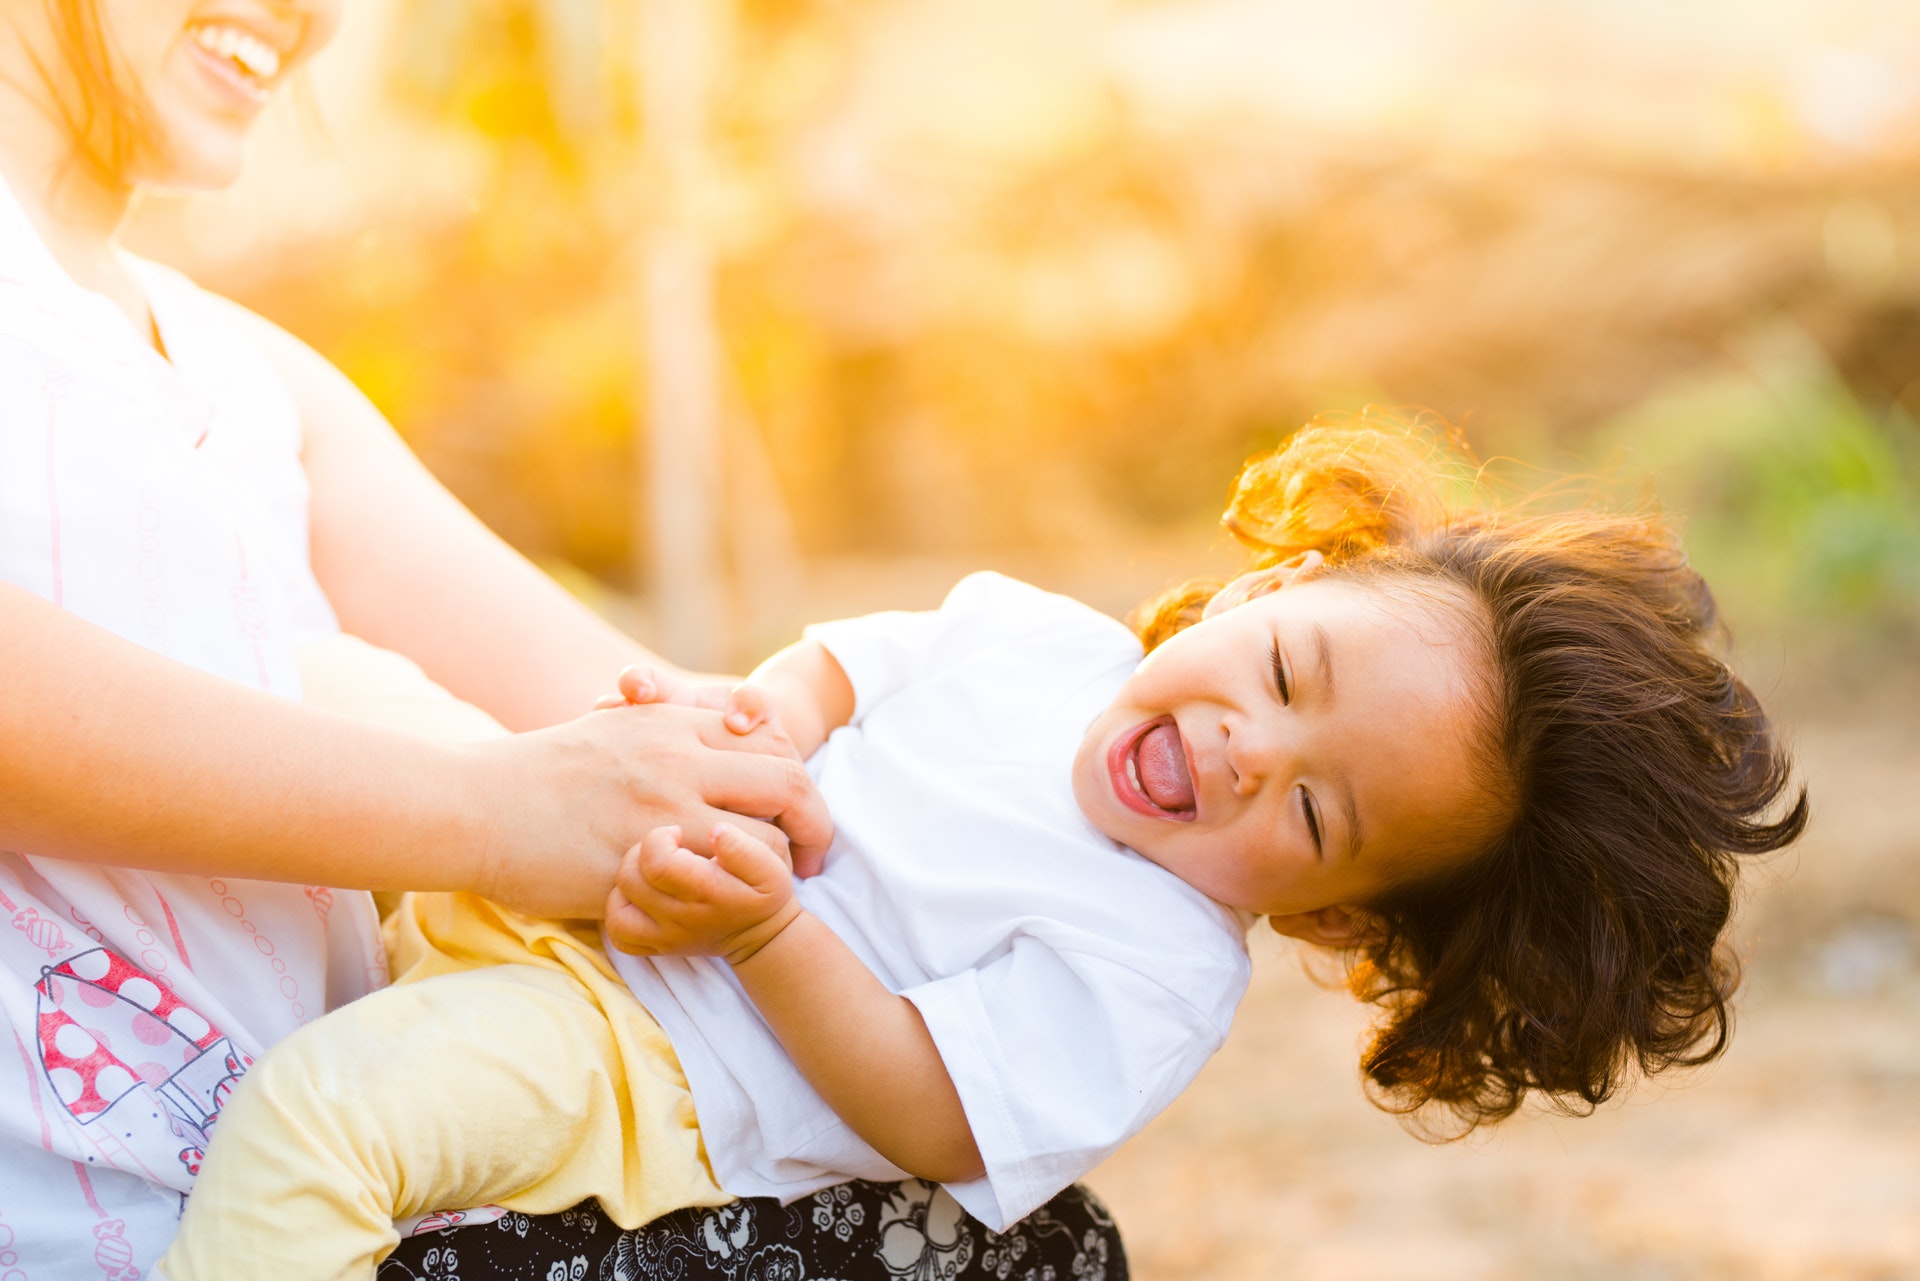 A laughing toddler being swung around by her mum